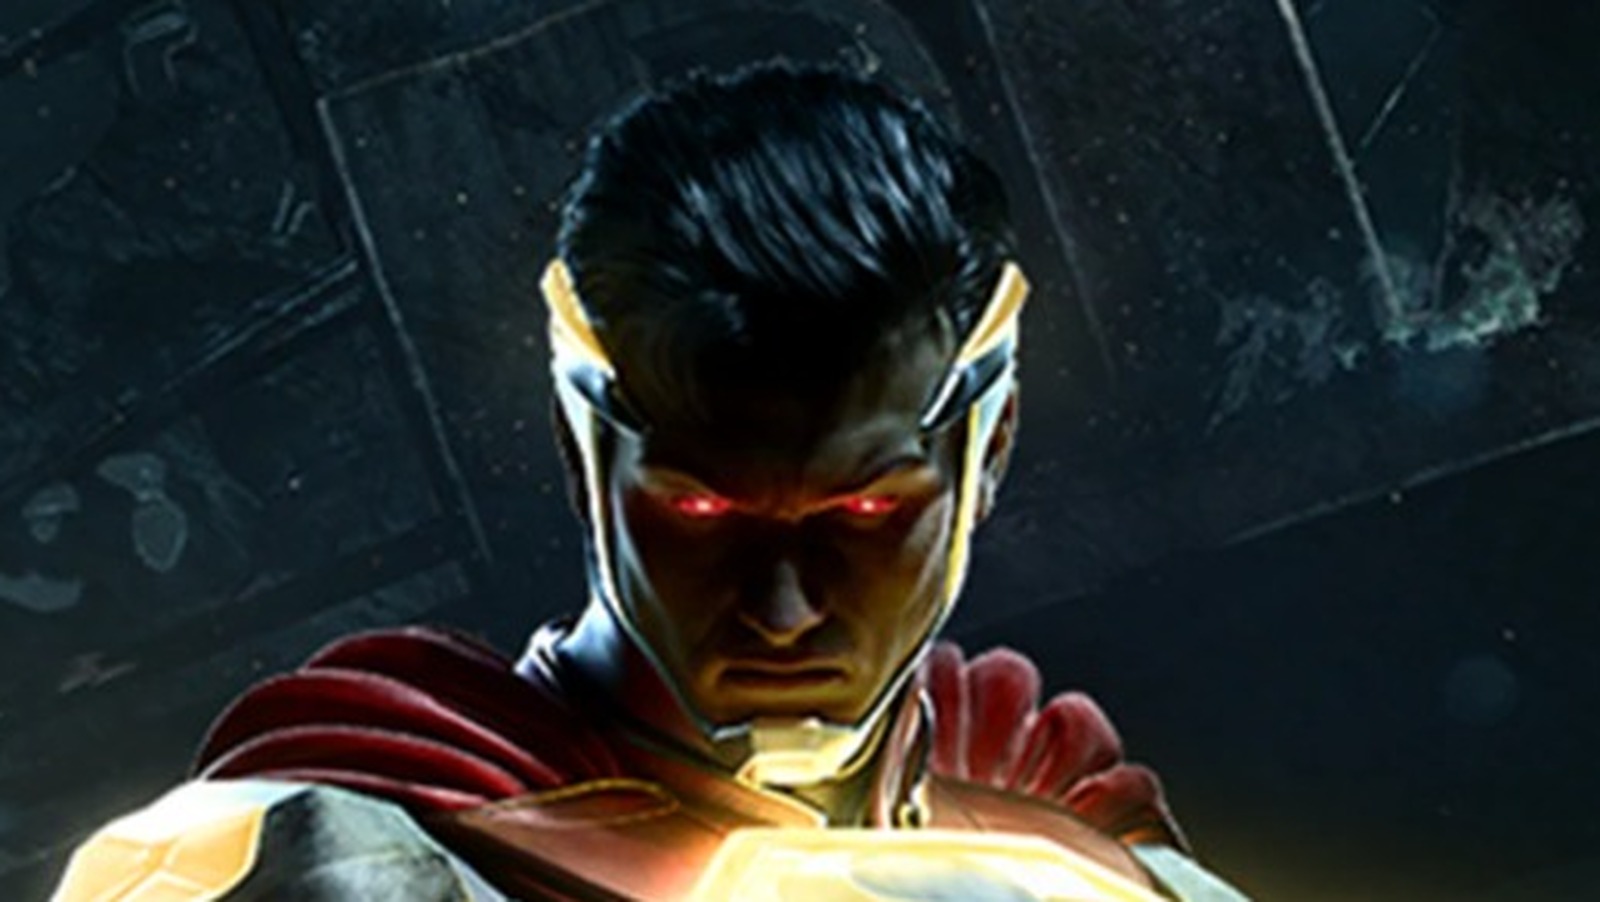 We Finally Know Why Injustice 3 Is Taking So Long